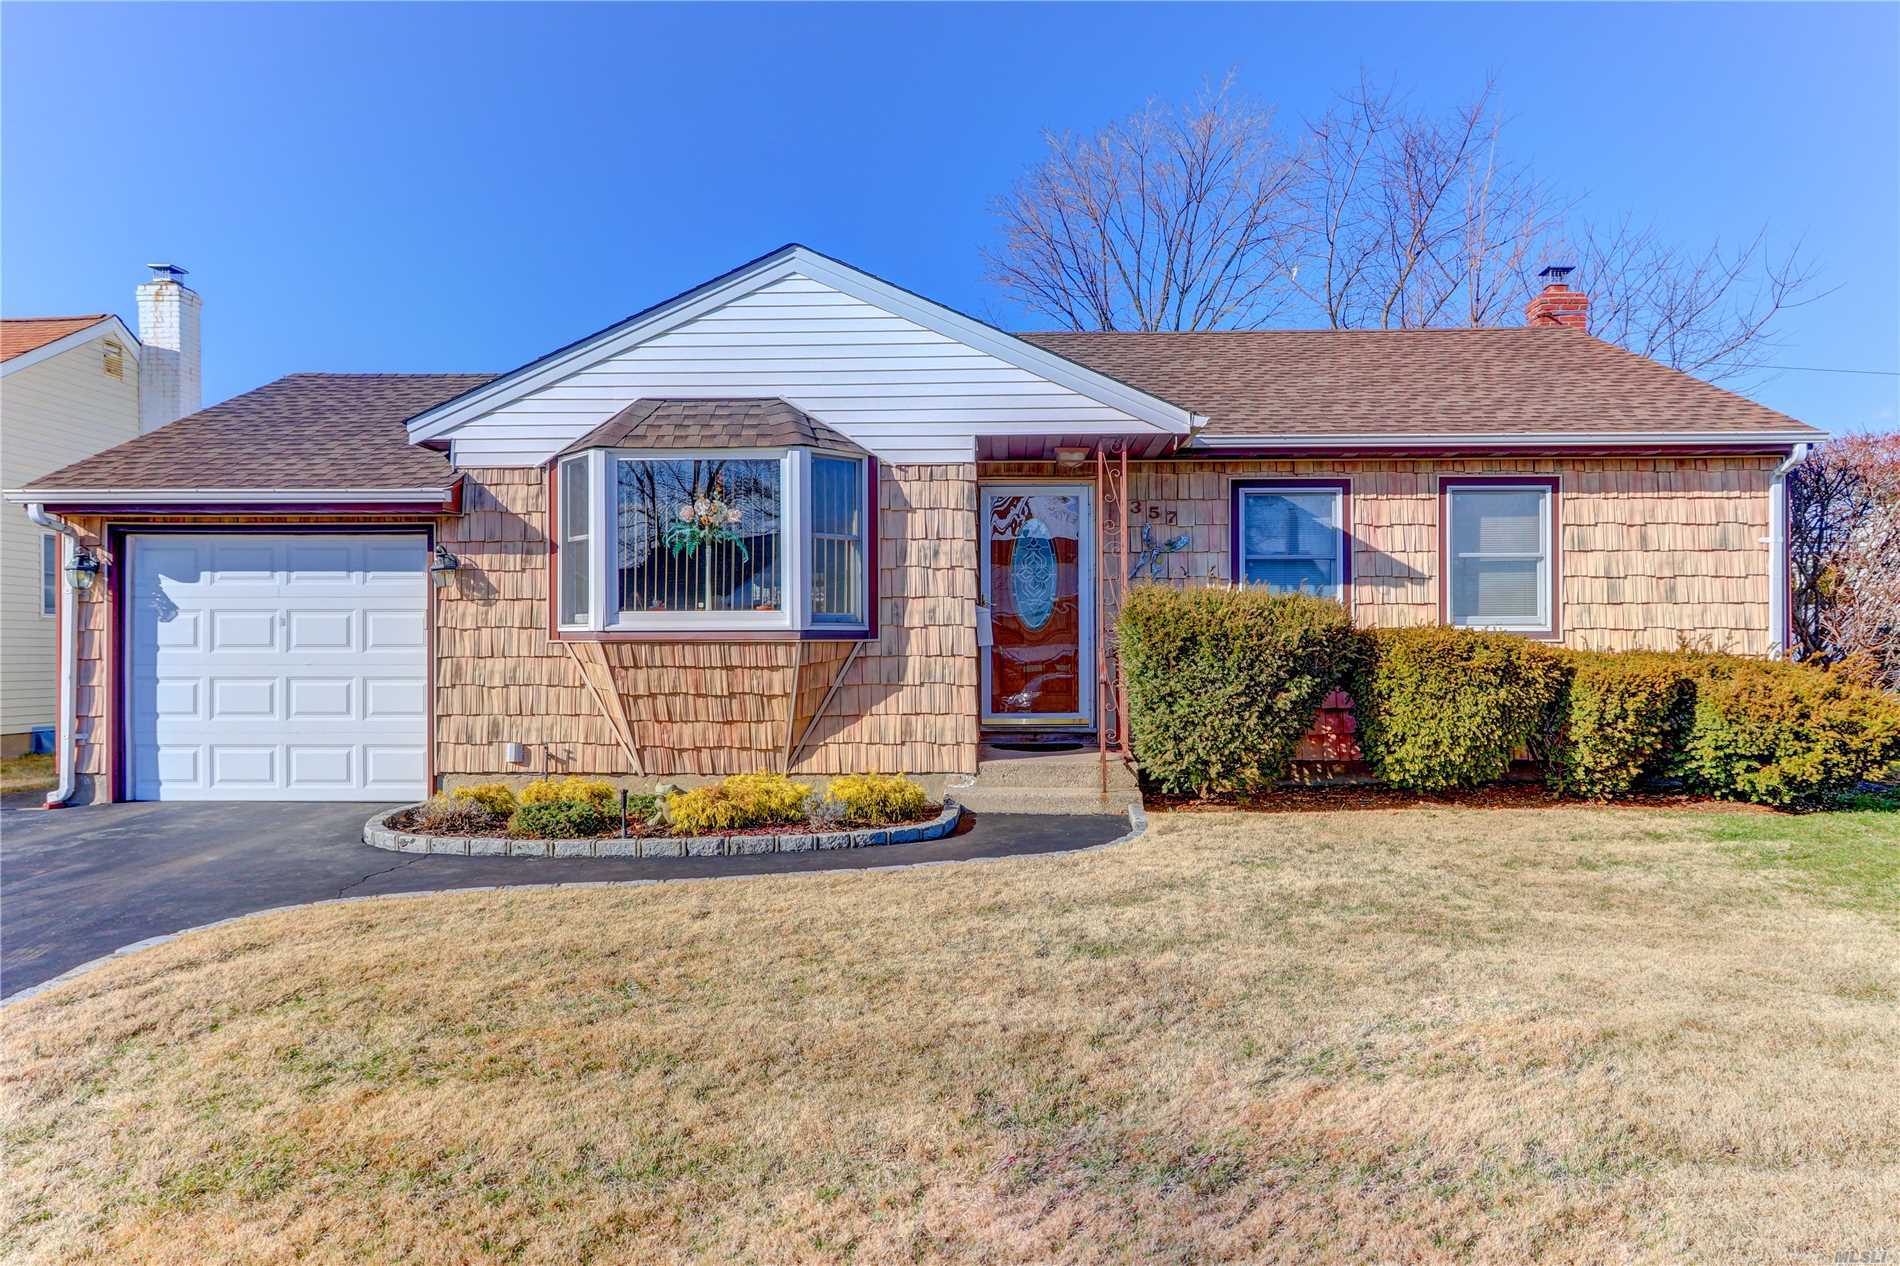 Lovely Ranch In The Heart Of Plainedge! New Maple Kitchen W/Granite/Ss Appliances, Updated Baths, All Andersen Windows, Andersen Sliders, 200 Amp Electric, New Arch Roof, New Hot Water Heater, 5 Year Old Cast Iron Oil Boiler, New Cac, & More!